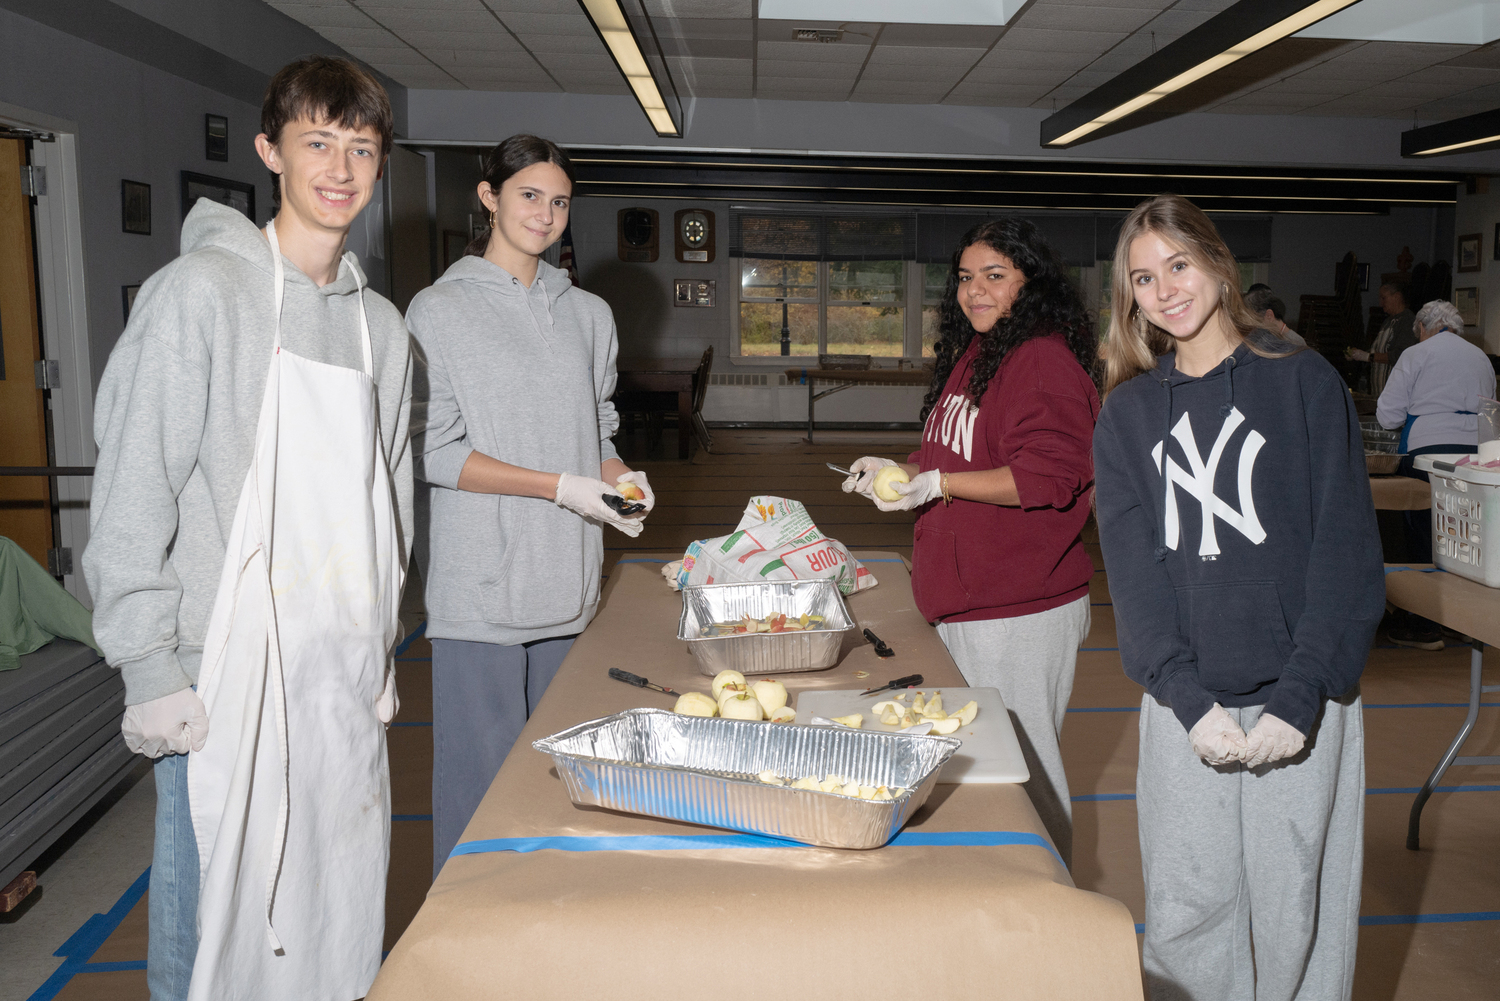 Ewan Shannon, from left, Isabella Sferrazza, Lucia Caruso and Lillian Jaeger, who are all Pierson High School students, volunteered to help peel apples. LORI HAWKINS